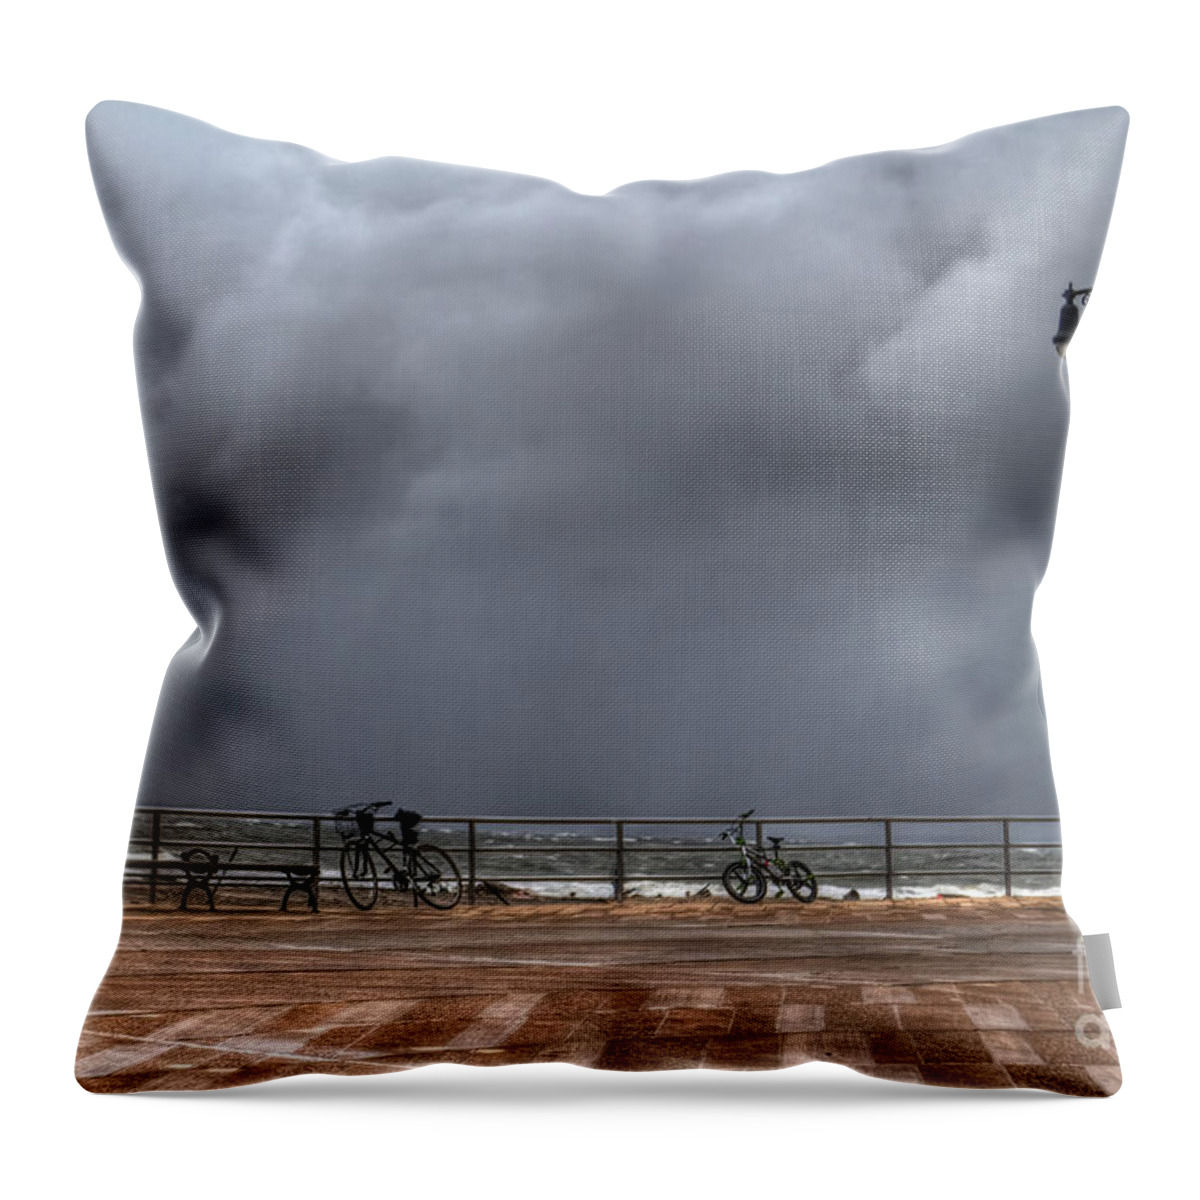 Bench Throw Pillow featuring the photograph Left In The Power Of The Storm by Evelina Kremsdorf